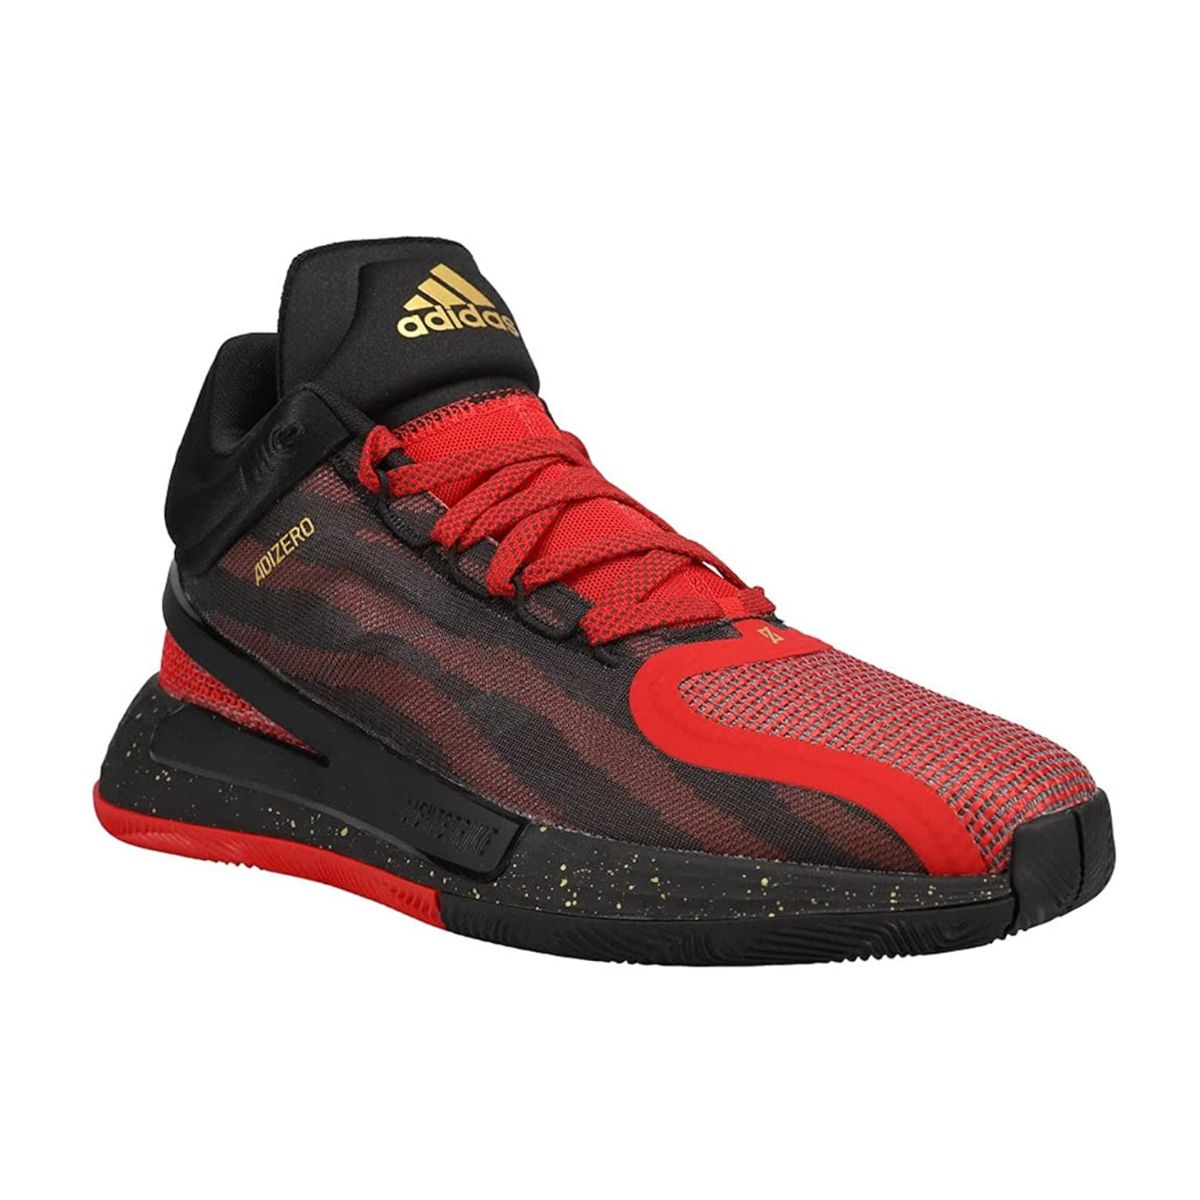 D-Rose 11 - Basketball Shoe - Red - US-8.5